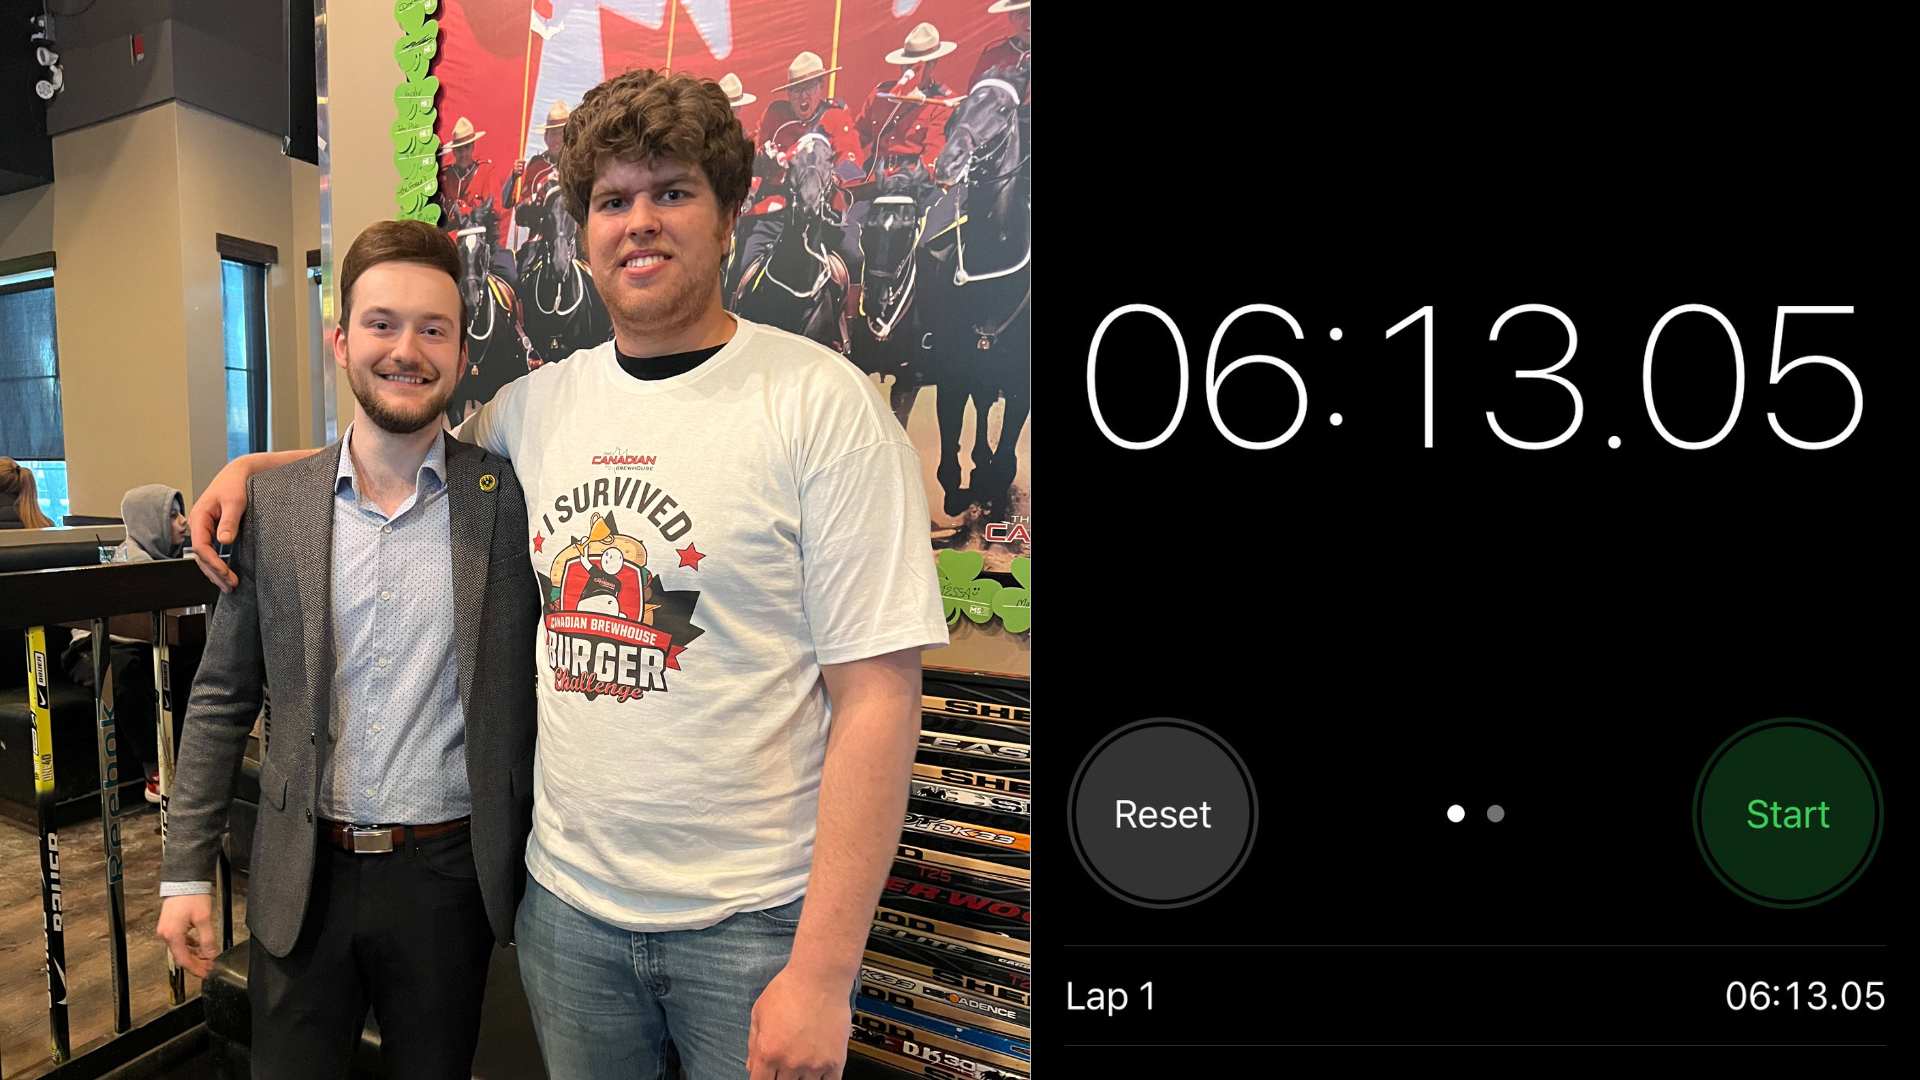 Photo of a customer who won the Great Canadian Burger Challenge and set the new record, posing with a manager. Stitched together with a screenshot of someone's stopwatch on their phone, showing a time of 06:13.05